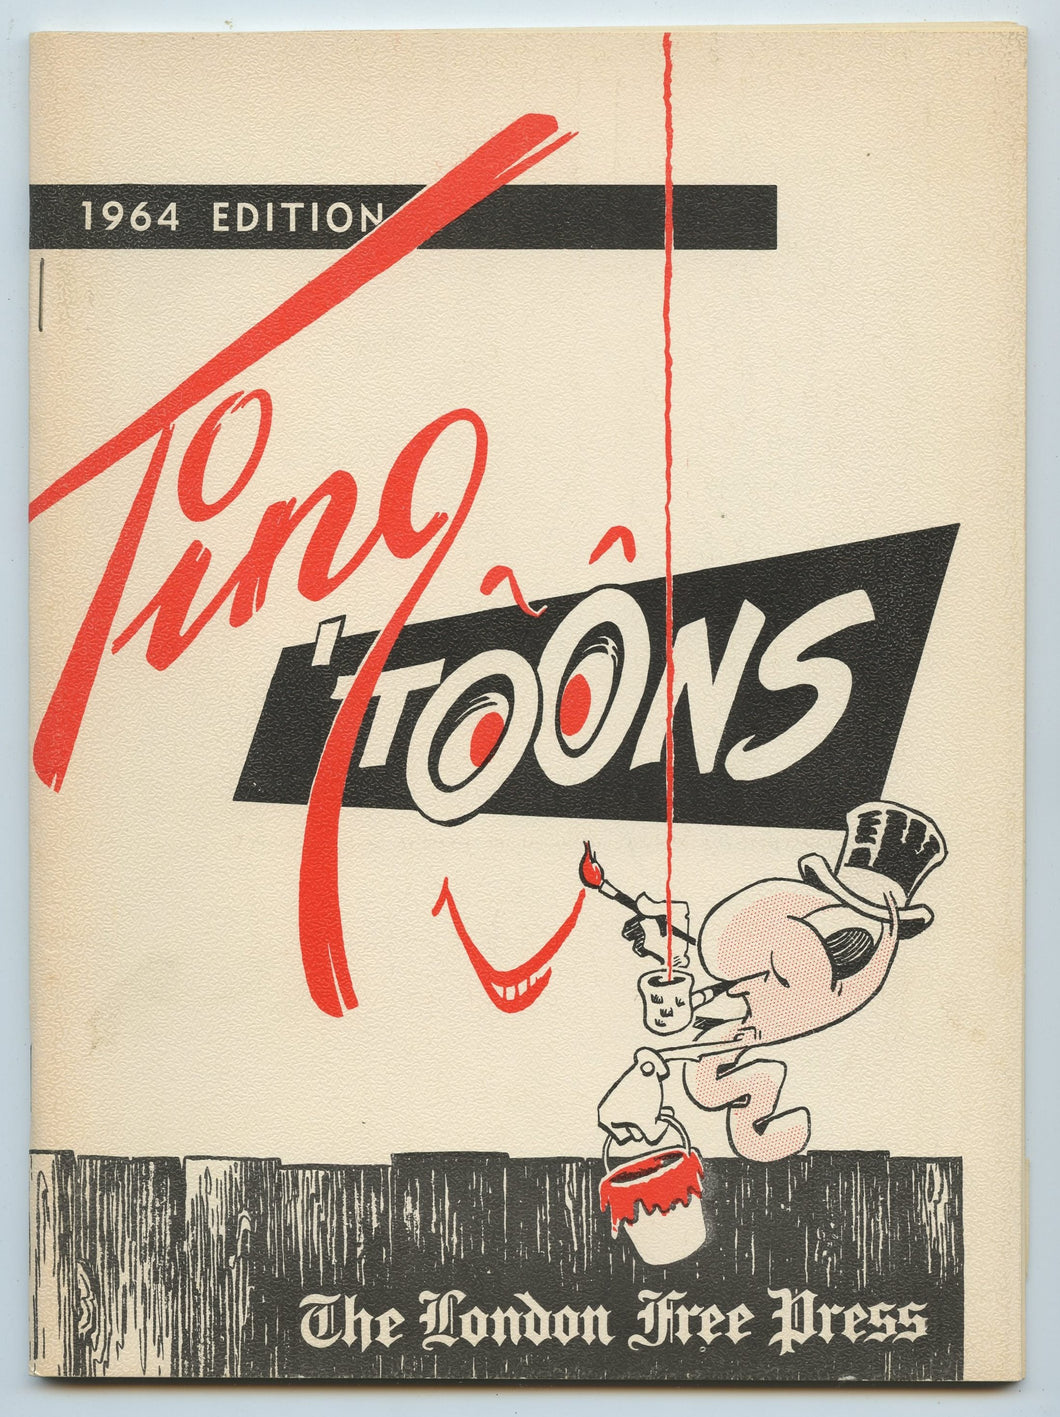 Ting 'Toons. 1964 Edition